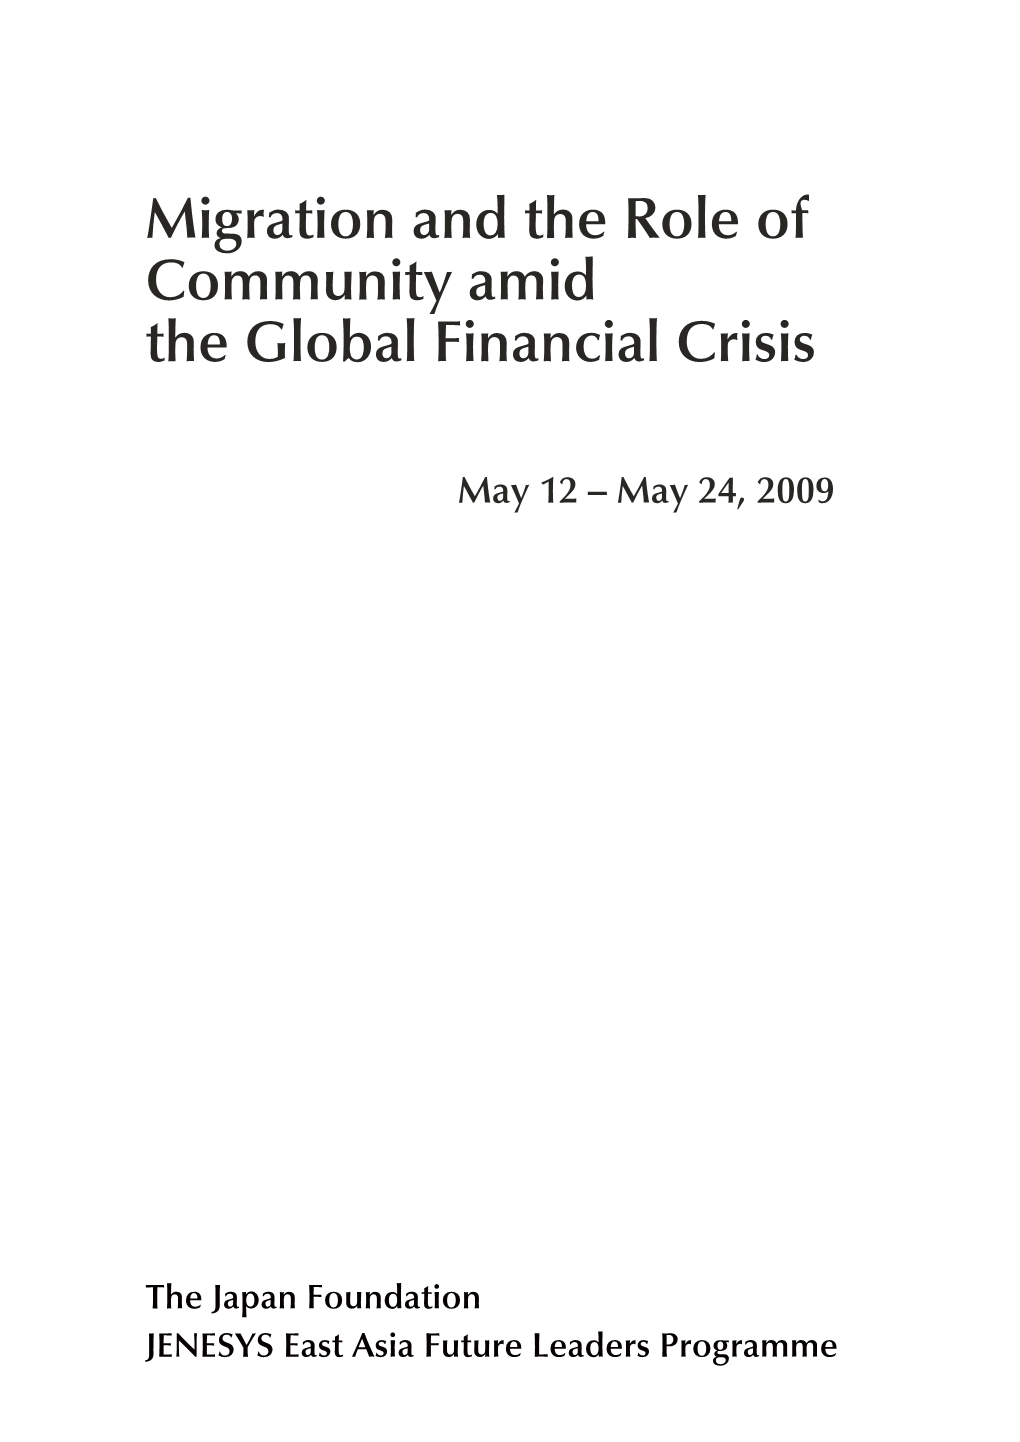 Migration and the Role of Community Amid the Global Financial Crisis